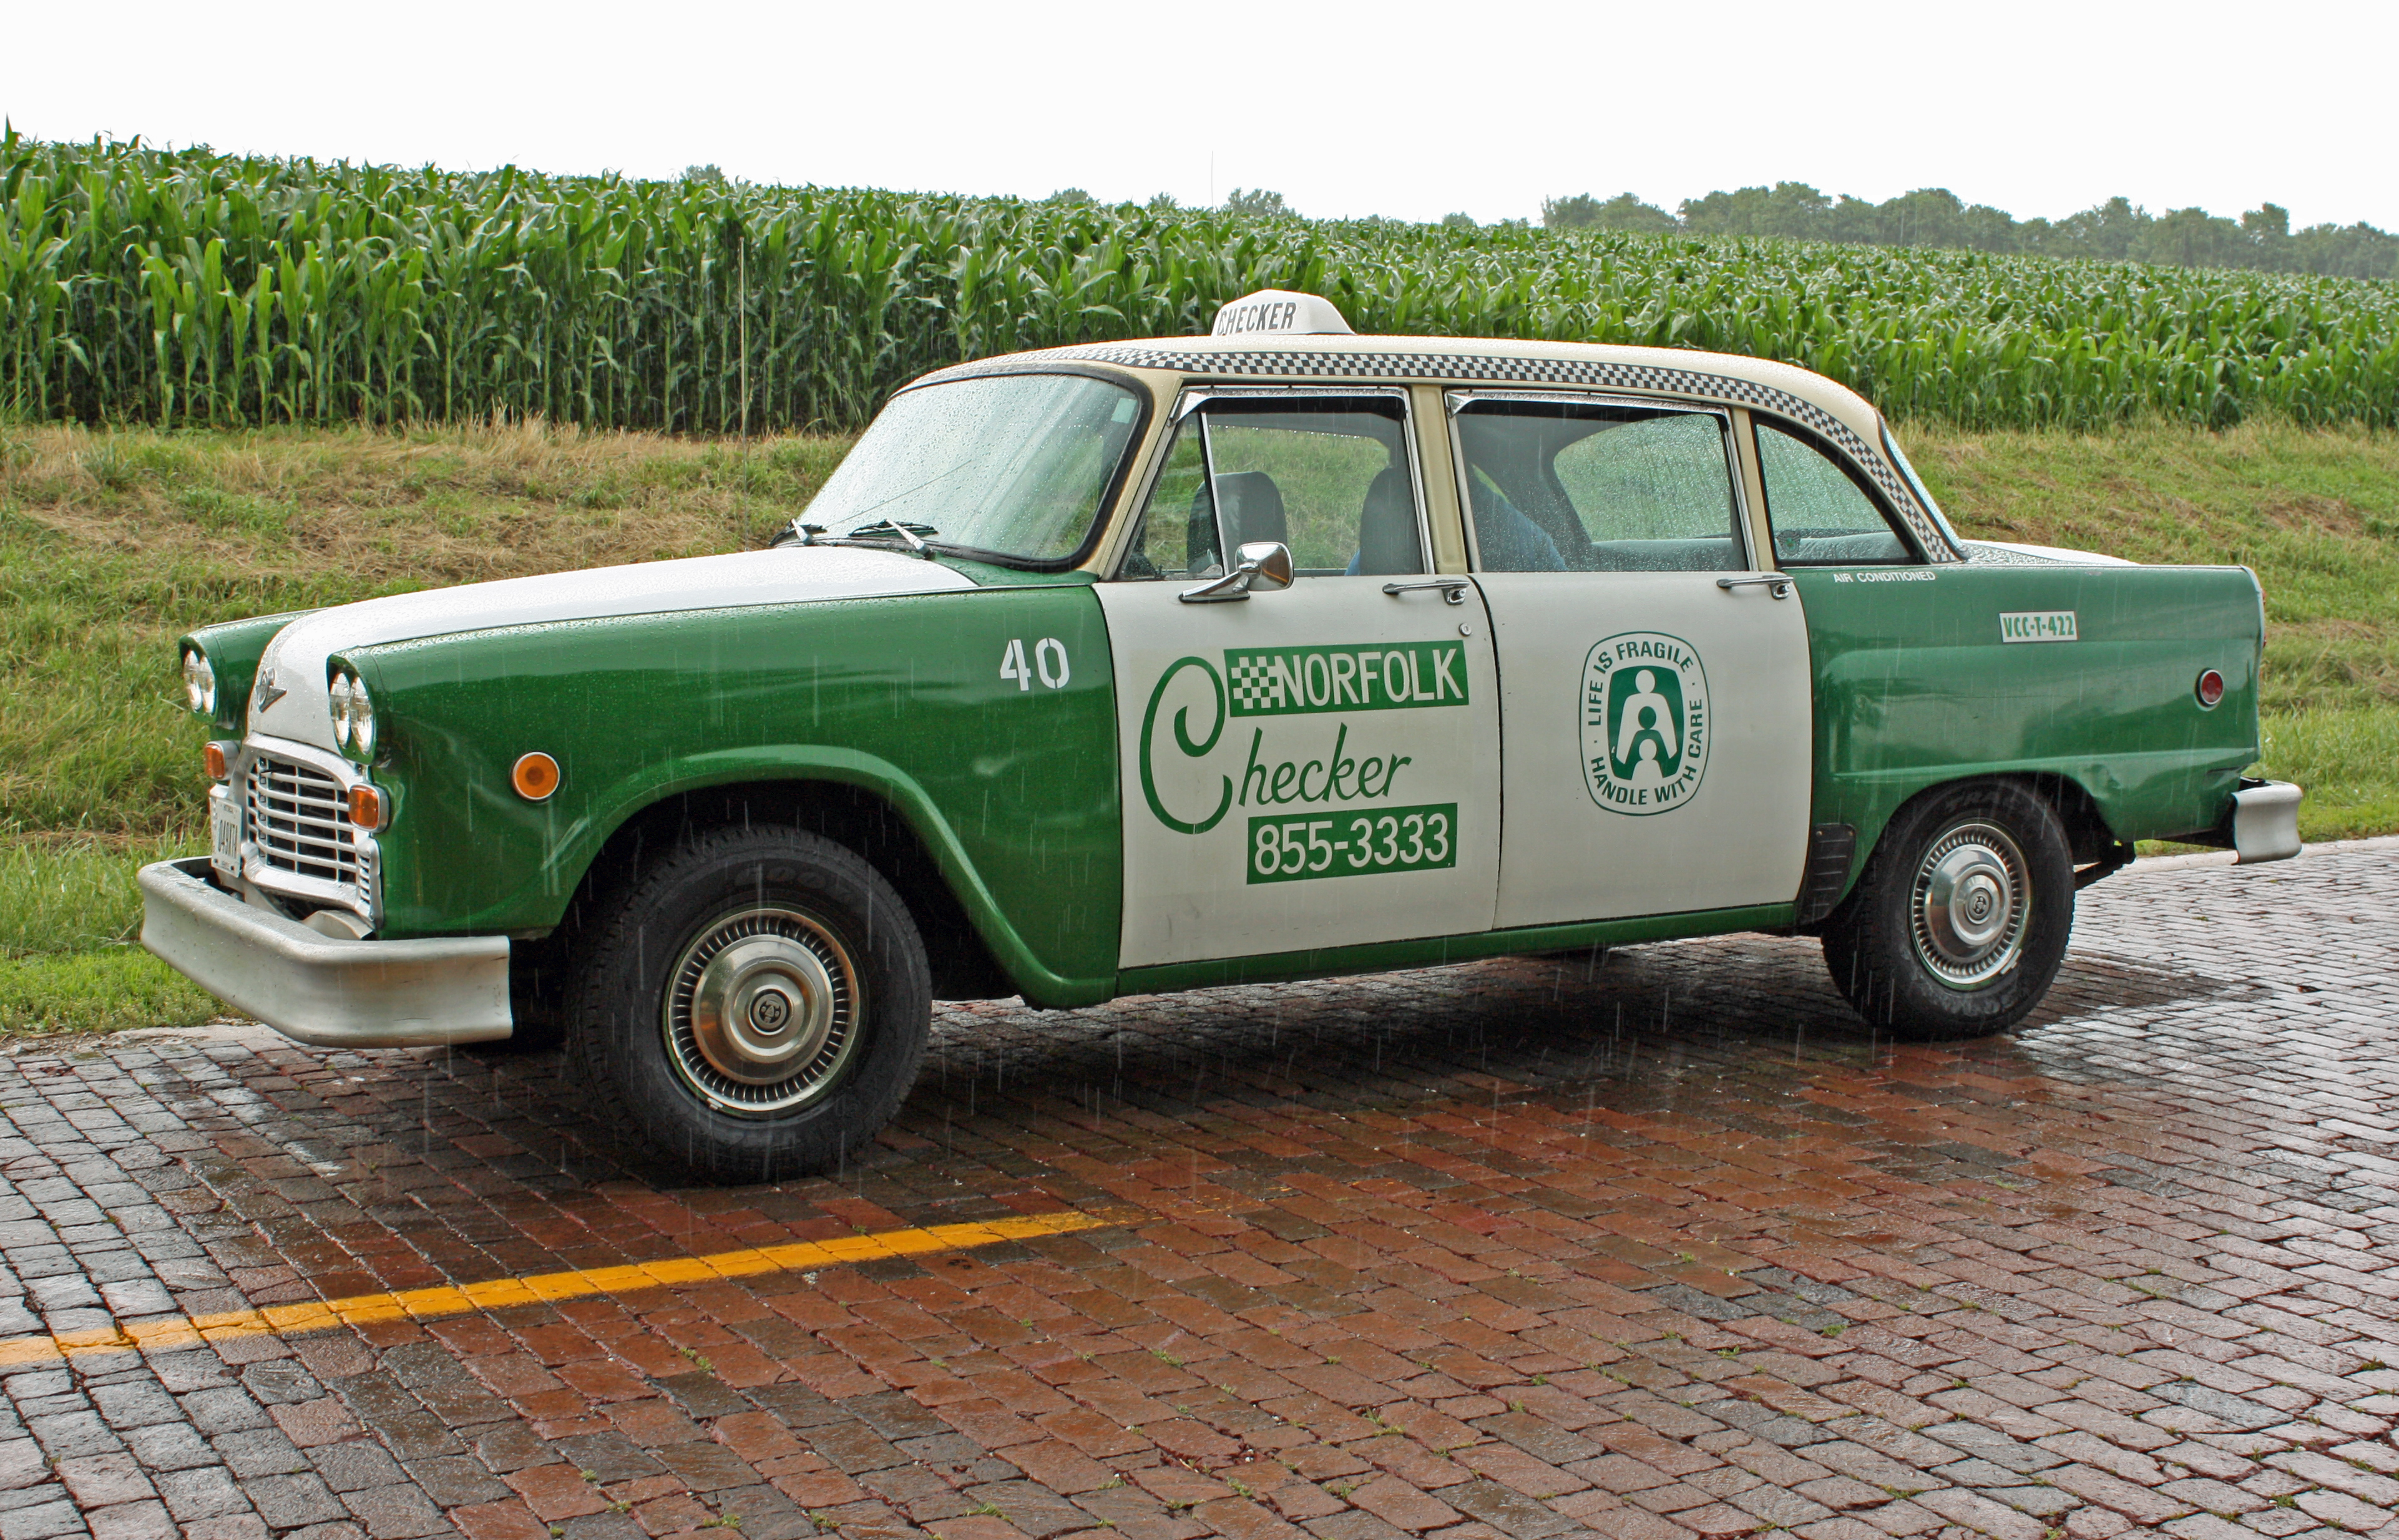 1981 Checker A11 Taxi (3 of 8) | Flickr - Photo Sharing!